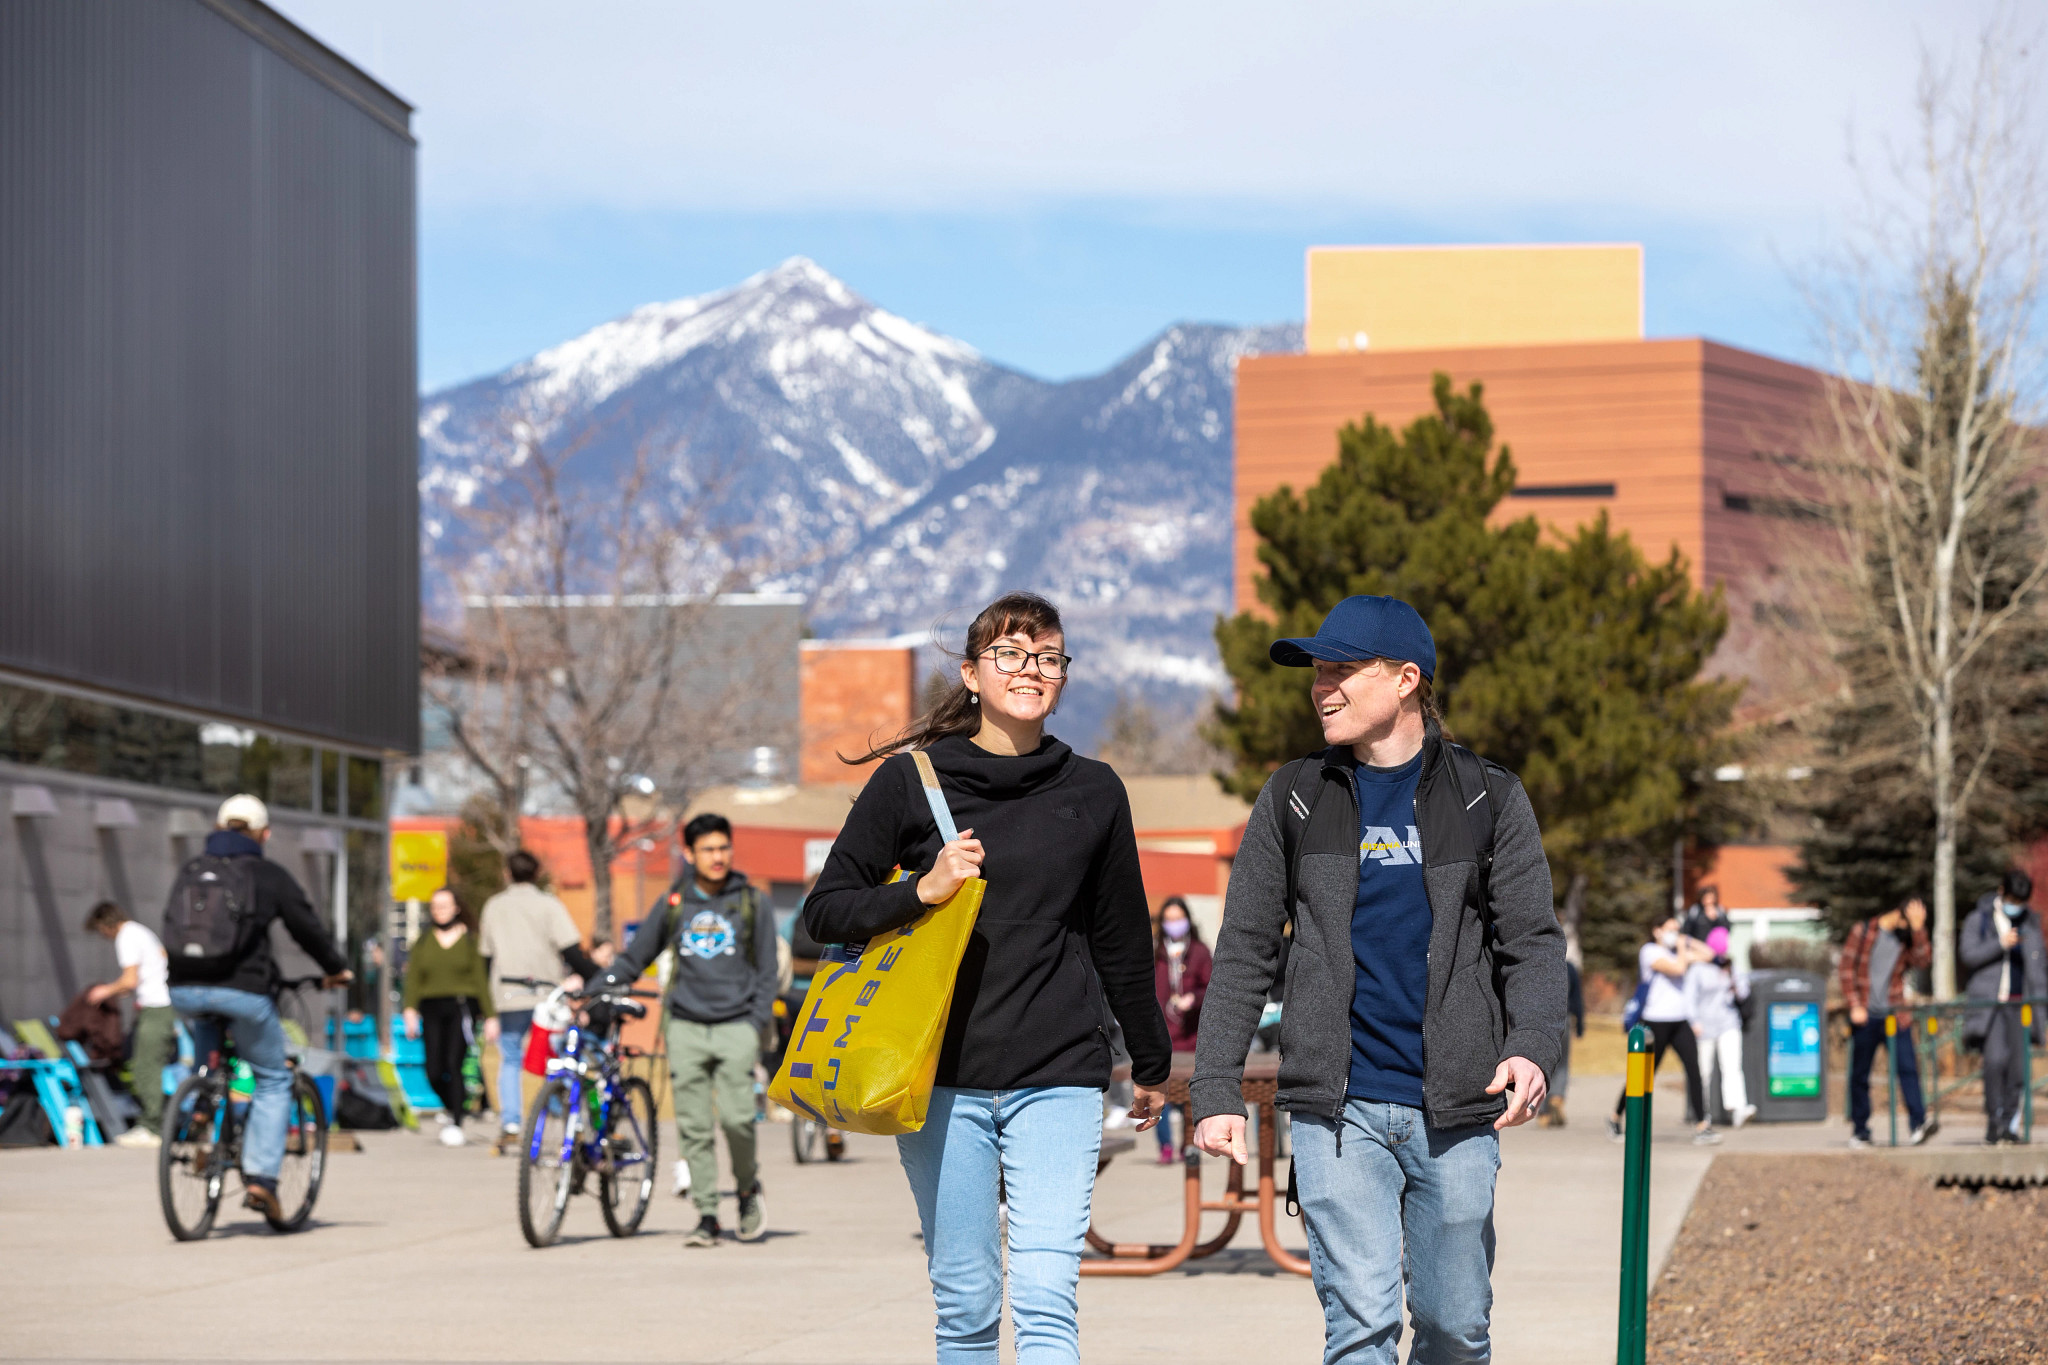 Students walking through campus grounds with mountains in the background.